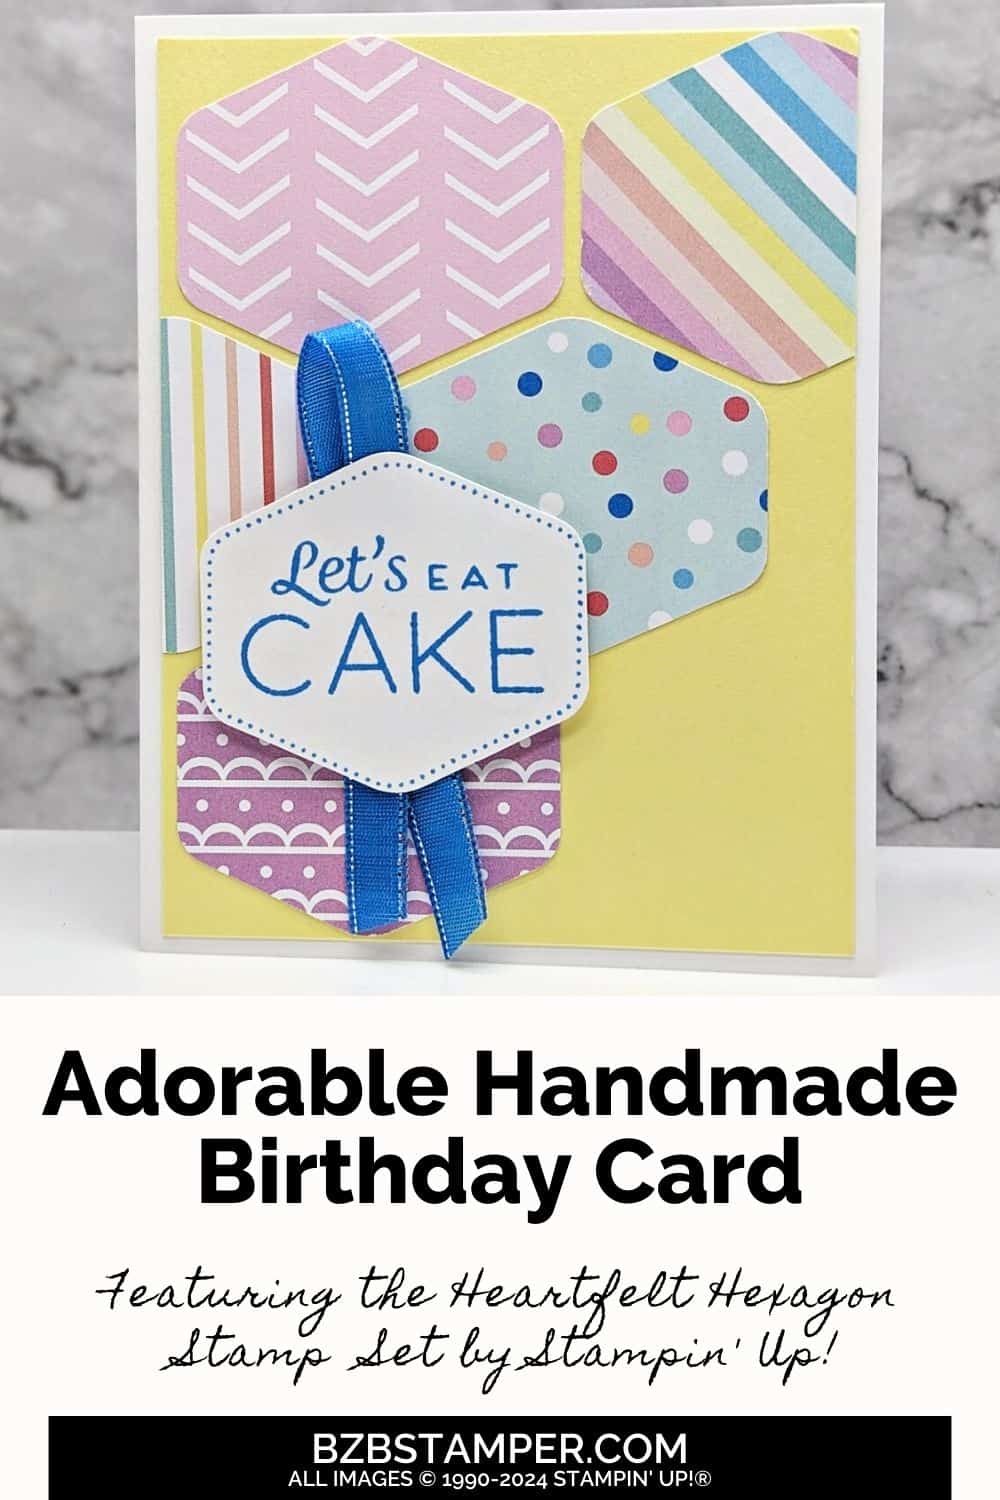 Heartfelt Hexagon Birthday Card featuring hexganon shapes punched from pretty paper in a variety of colors including blue and yellow.  Sentiment is "let's eat cake".